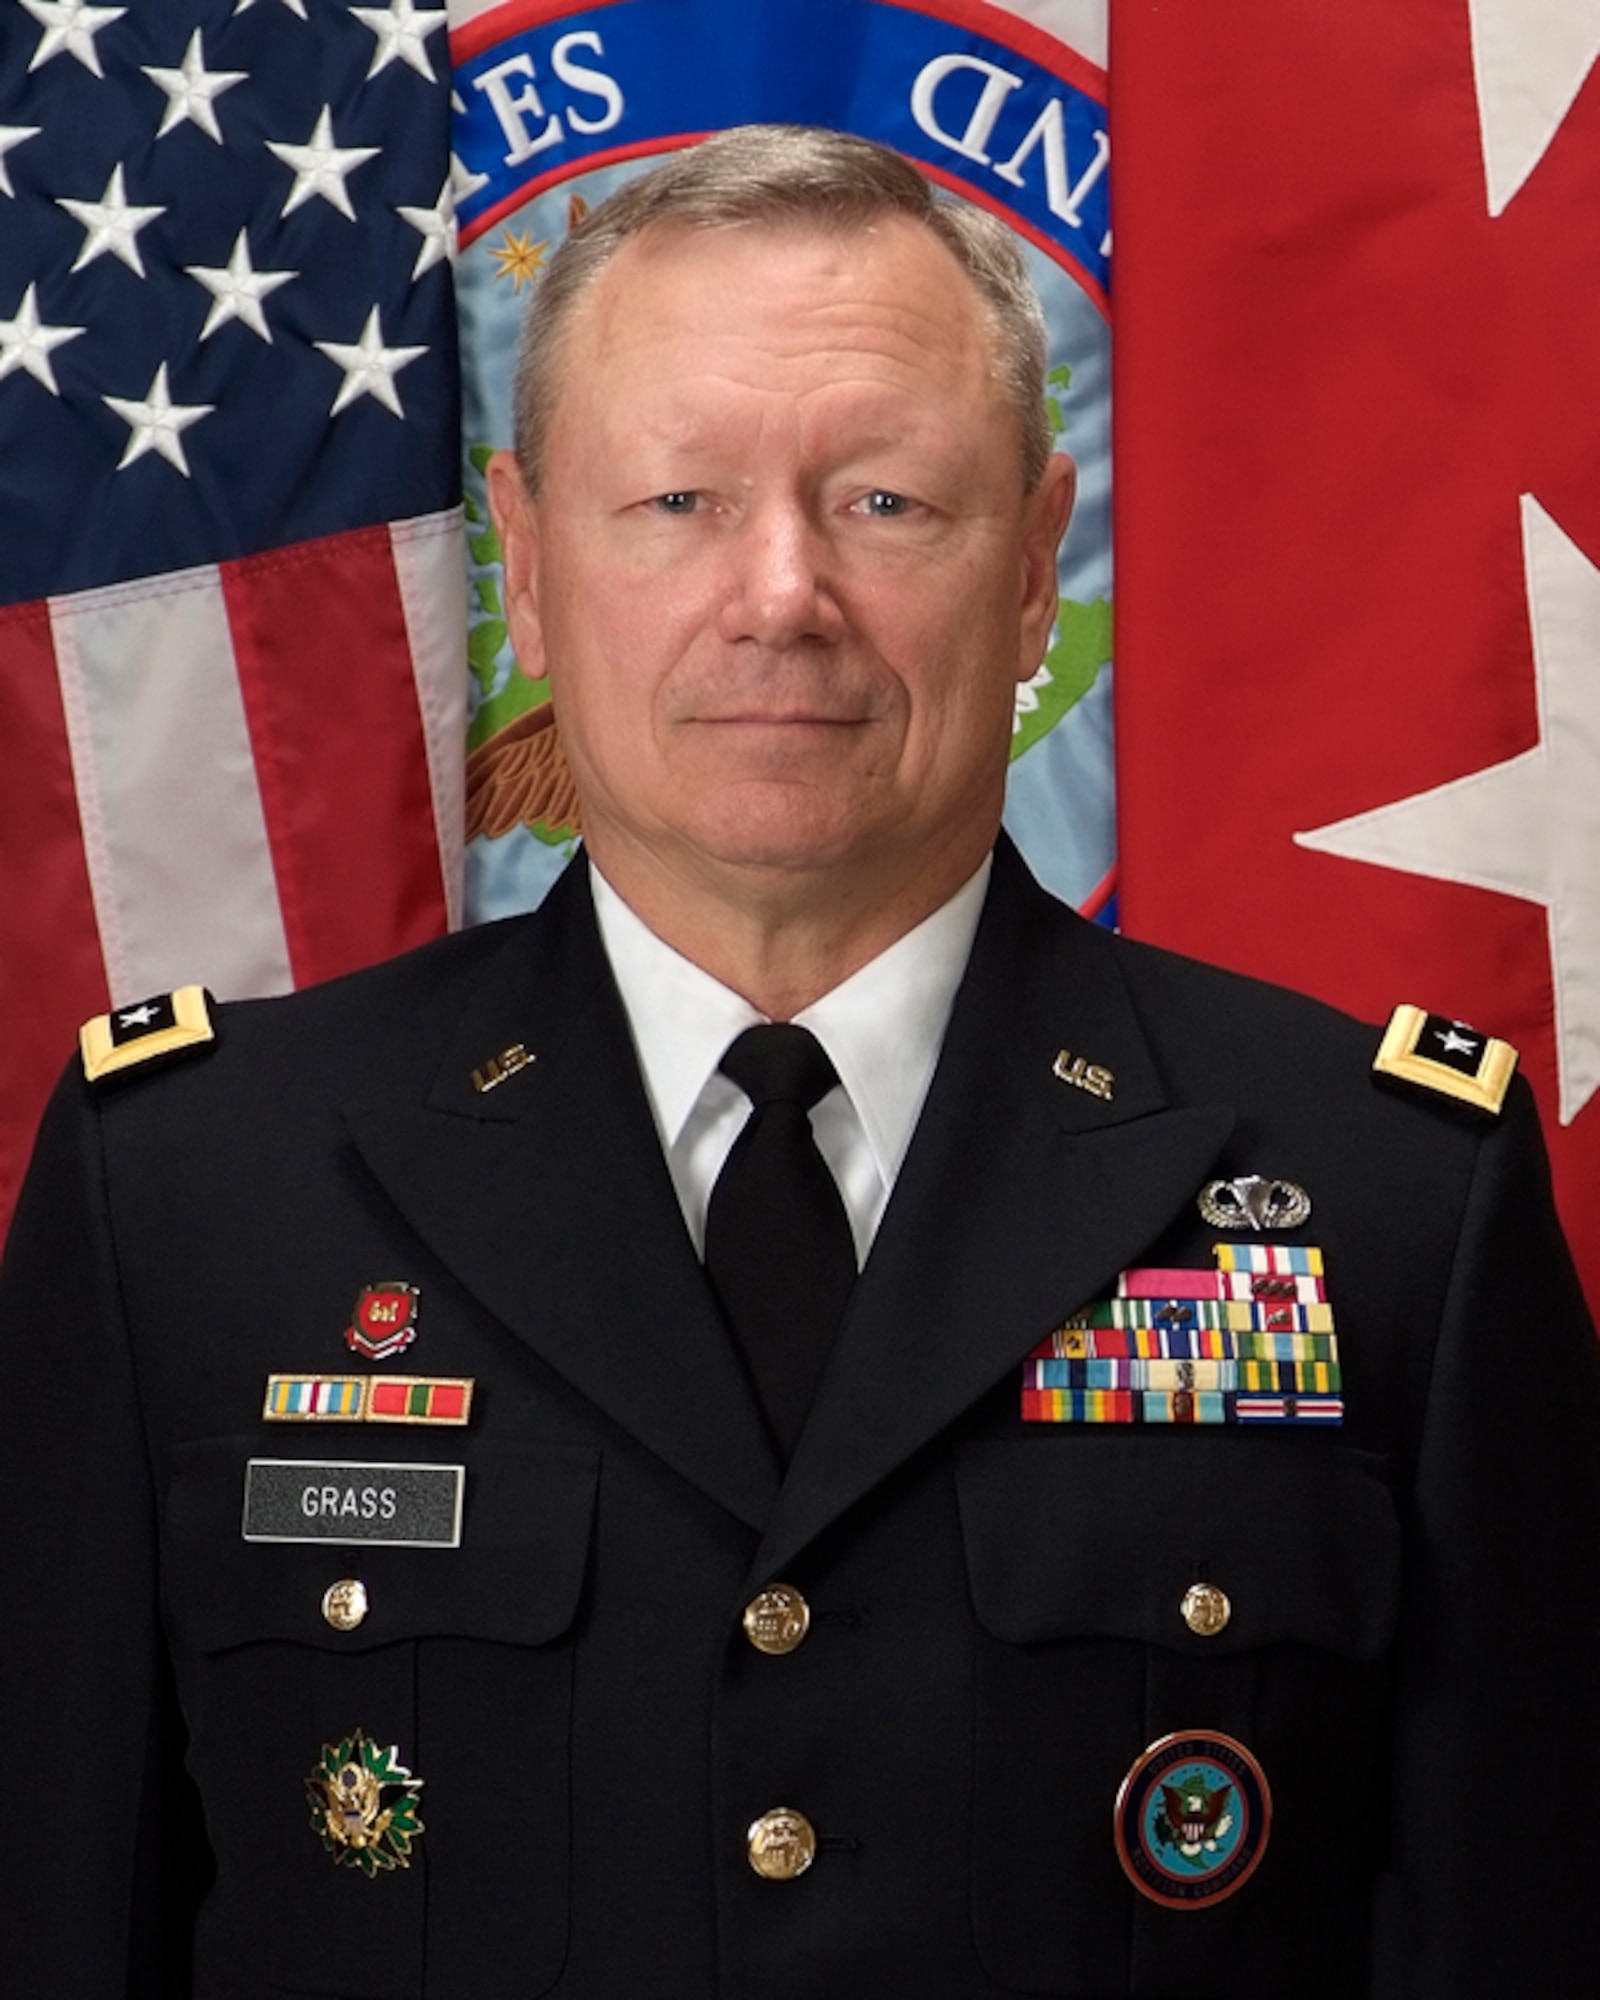 President Obama has nominated the deputy commander of U.S. Northern Command, Army Lt. Gen. Frank Grass, as the 27th chief of the National Guard Bureau